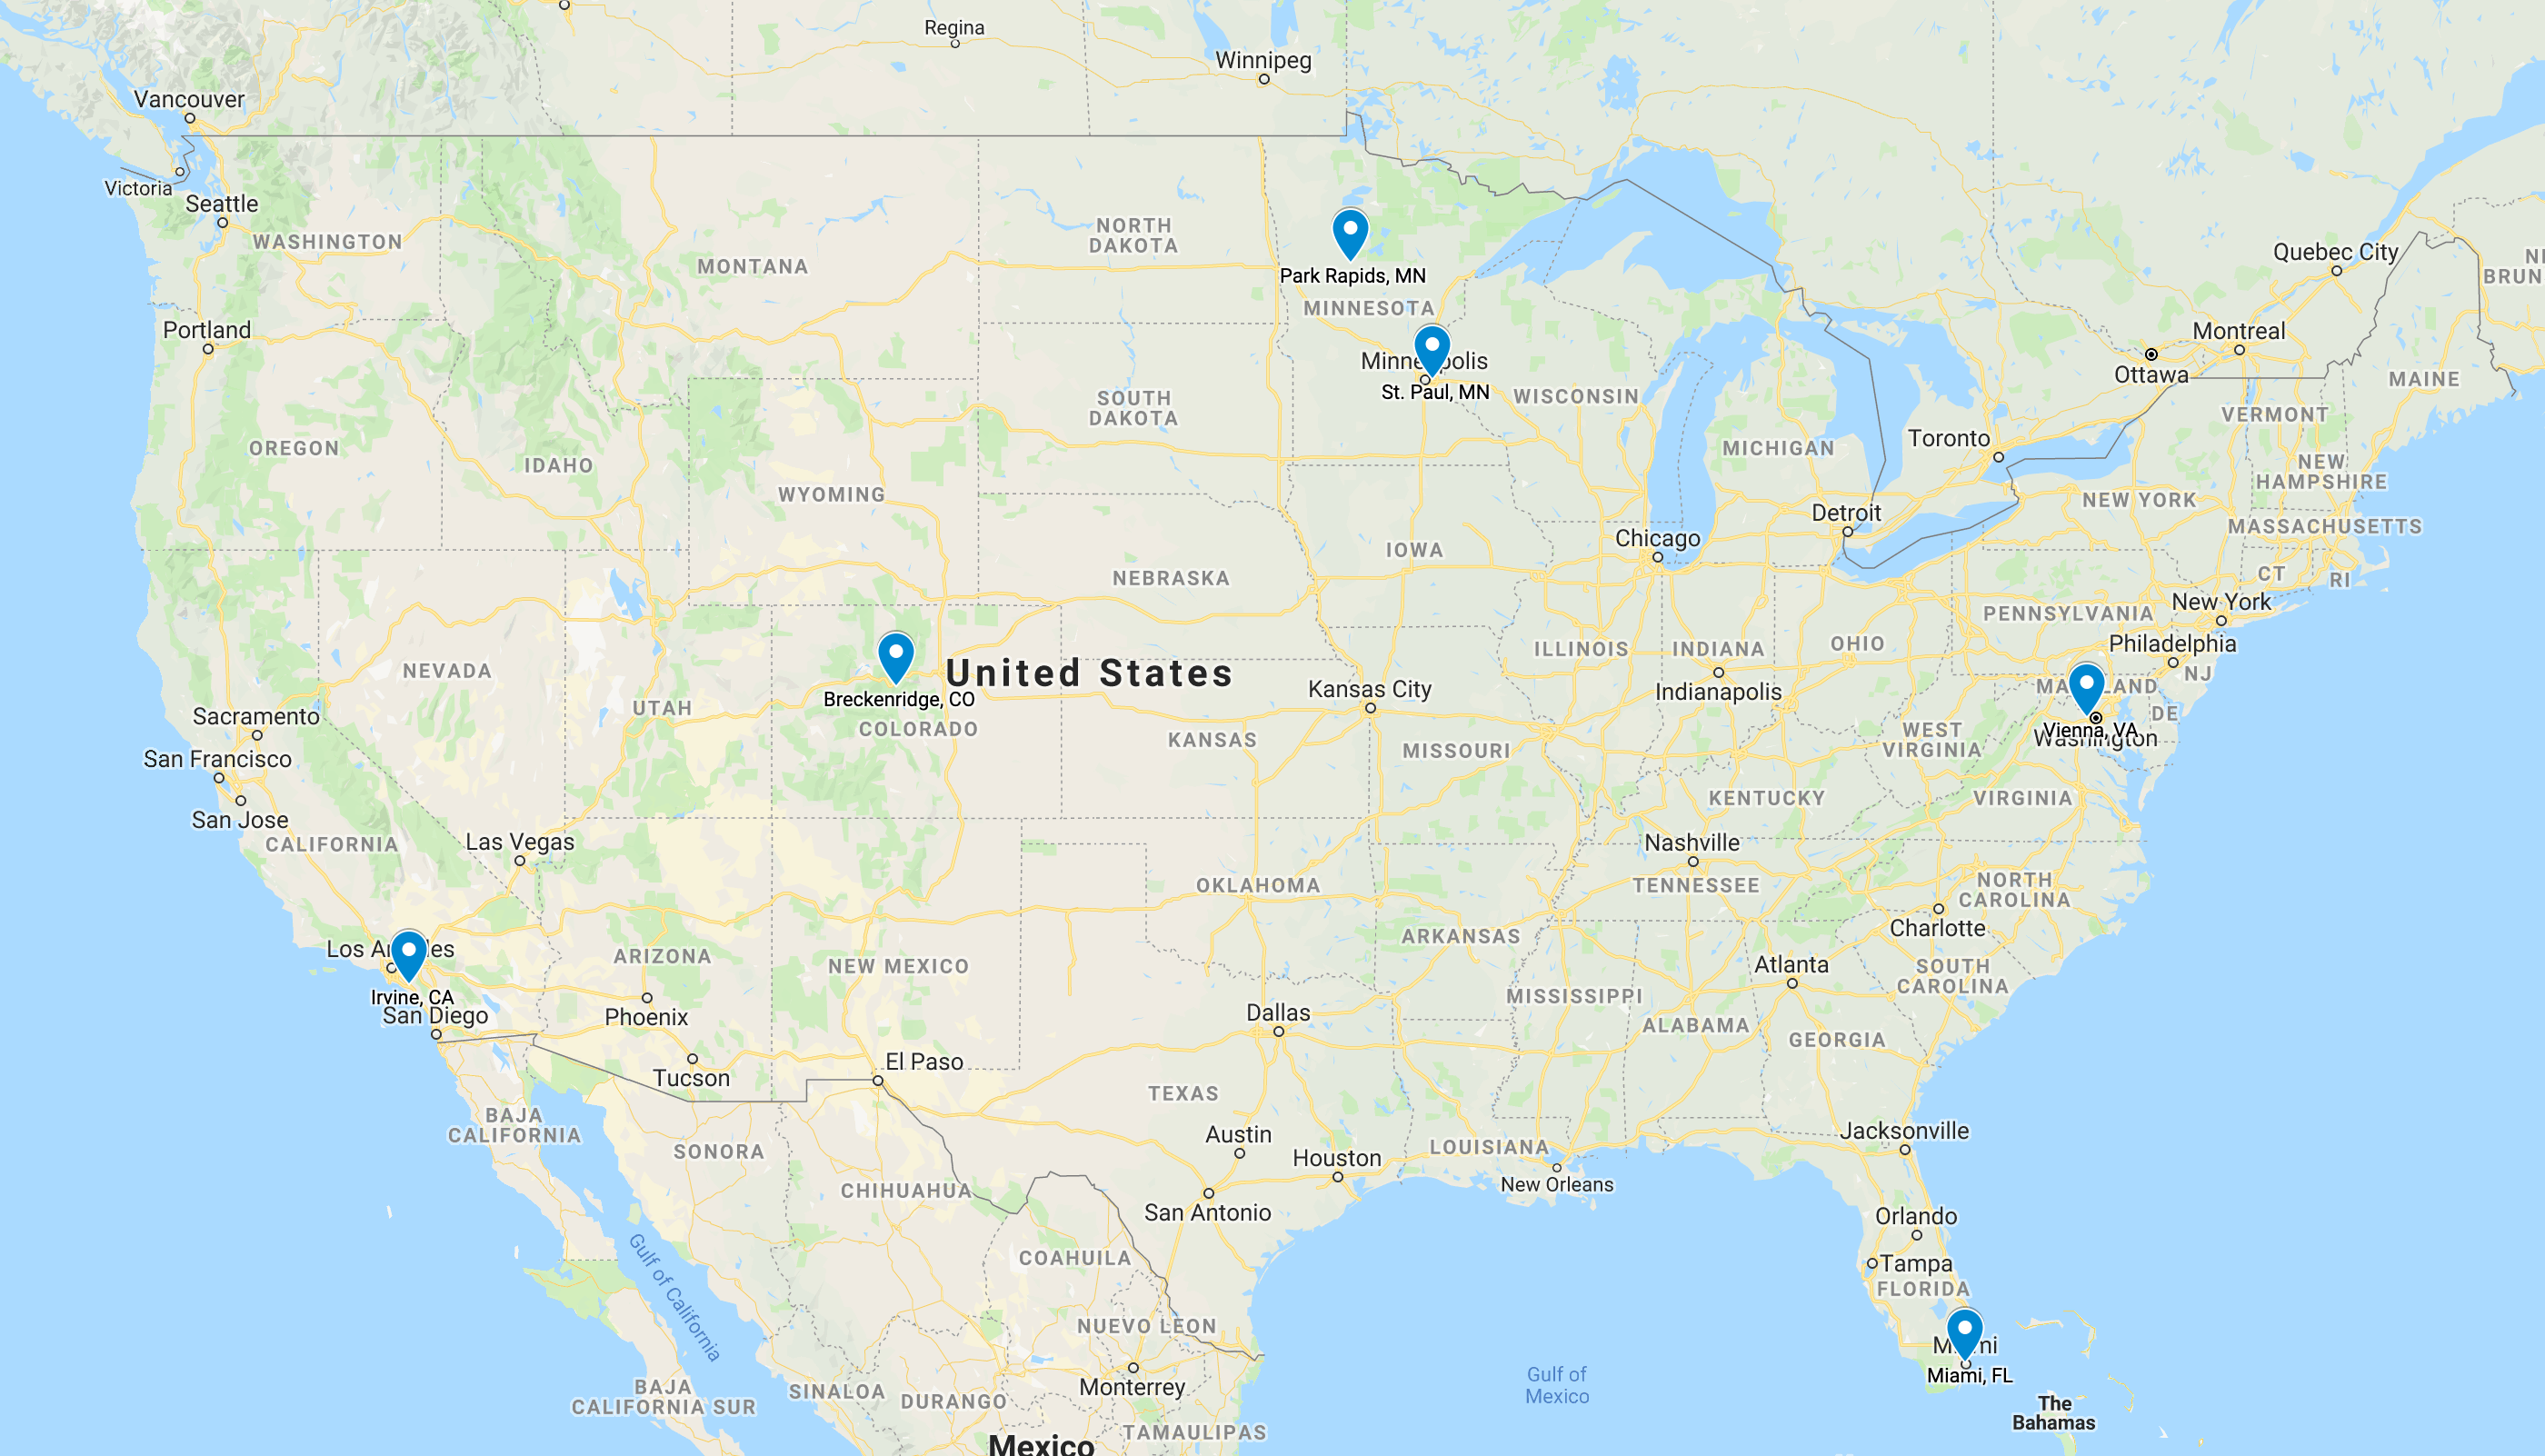 Dr. Justin speaking locations